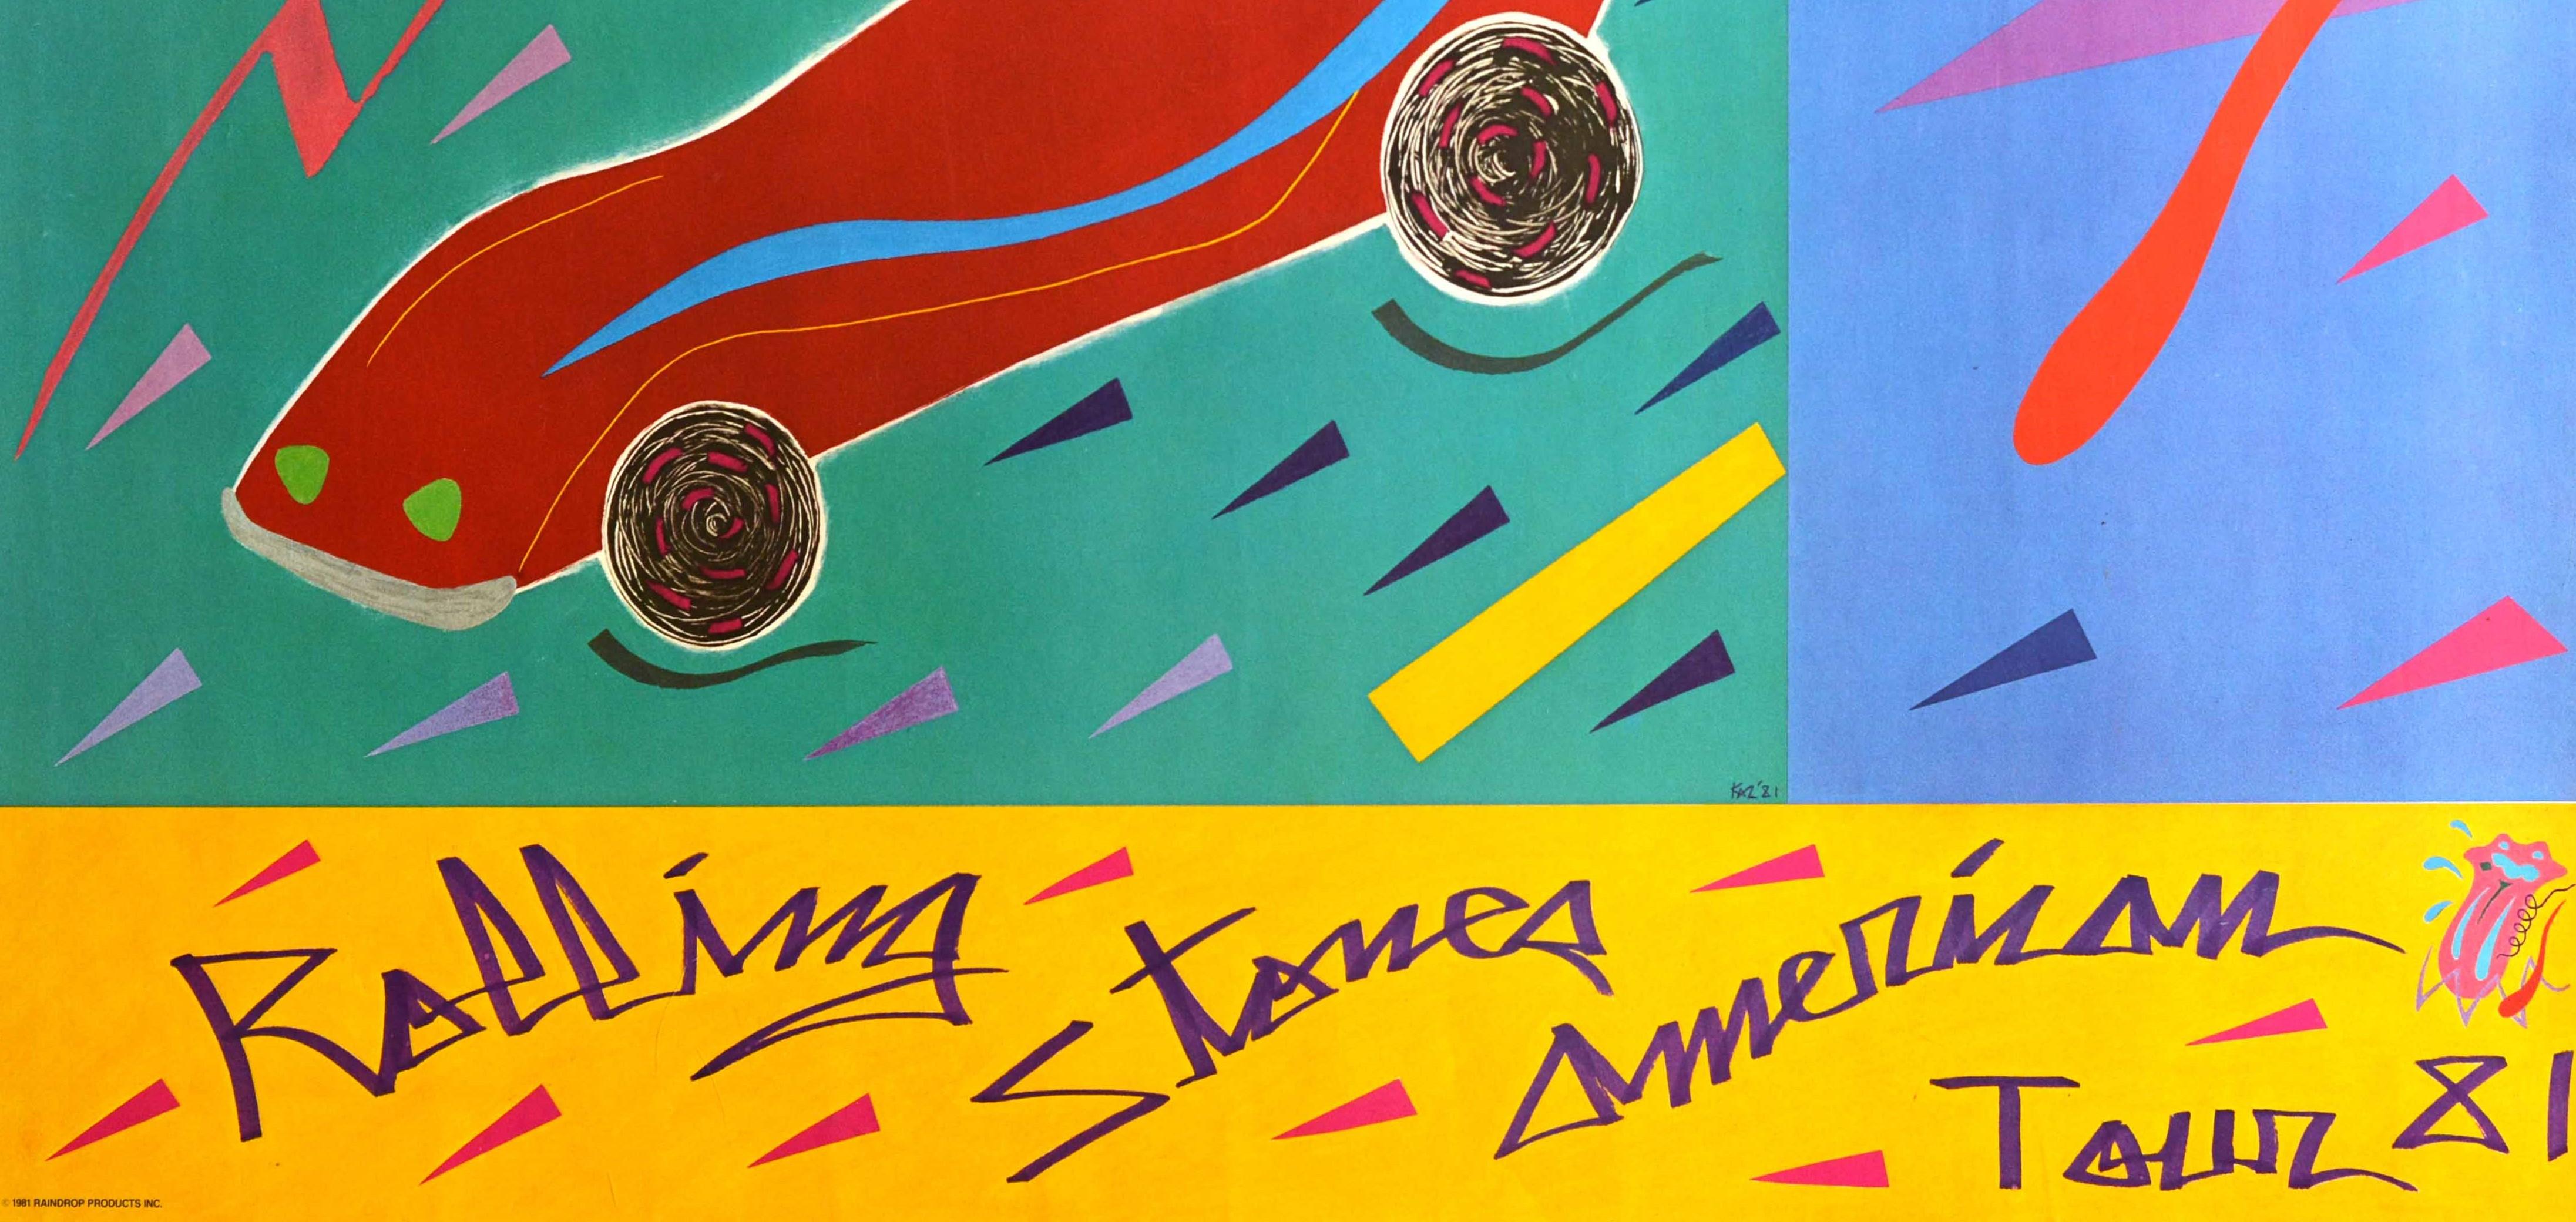 Original vintage music advertising poster for the Rolling Stones American Tour 1981 promoting their Tattoo You album featuring a colorful design with a car and the American flag in the corner with the stylized lettering and the Rolling Stones lips